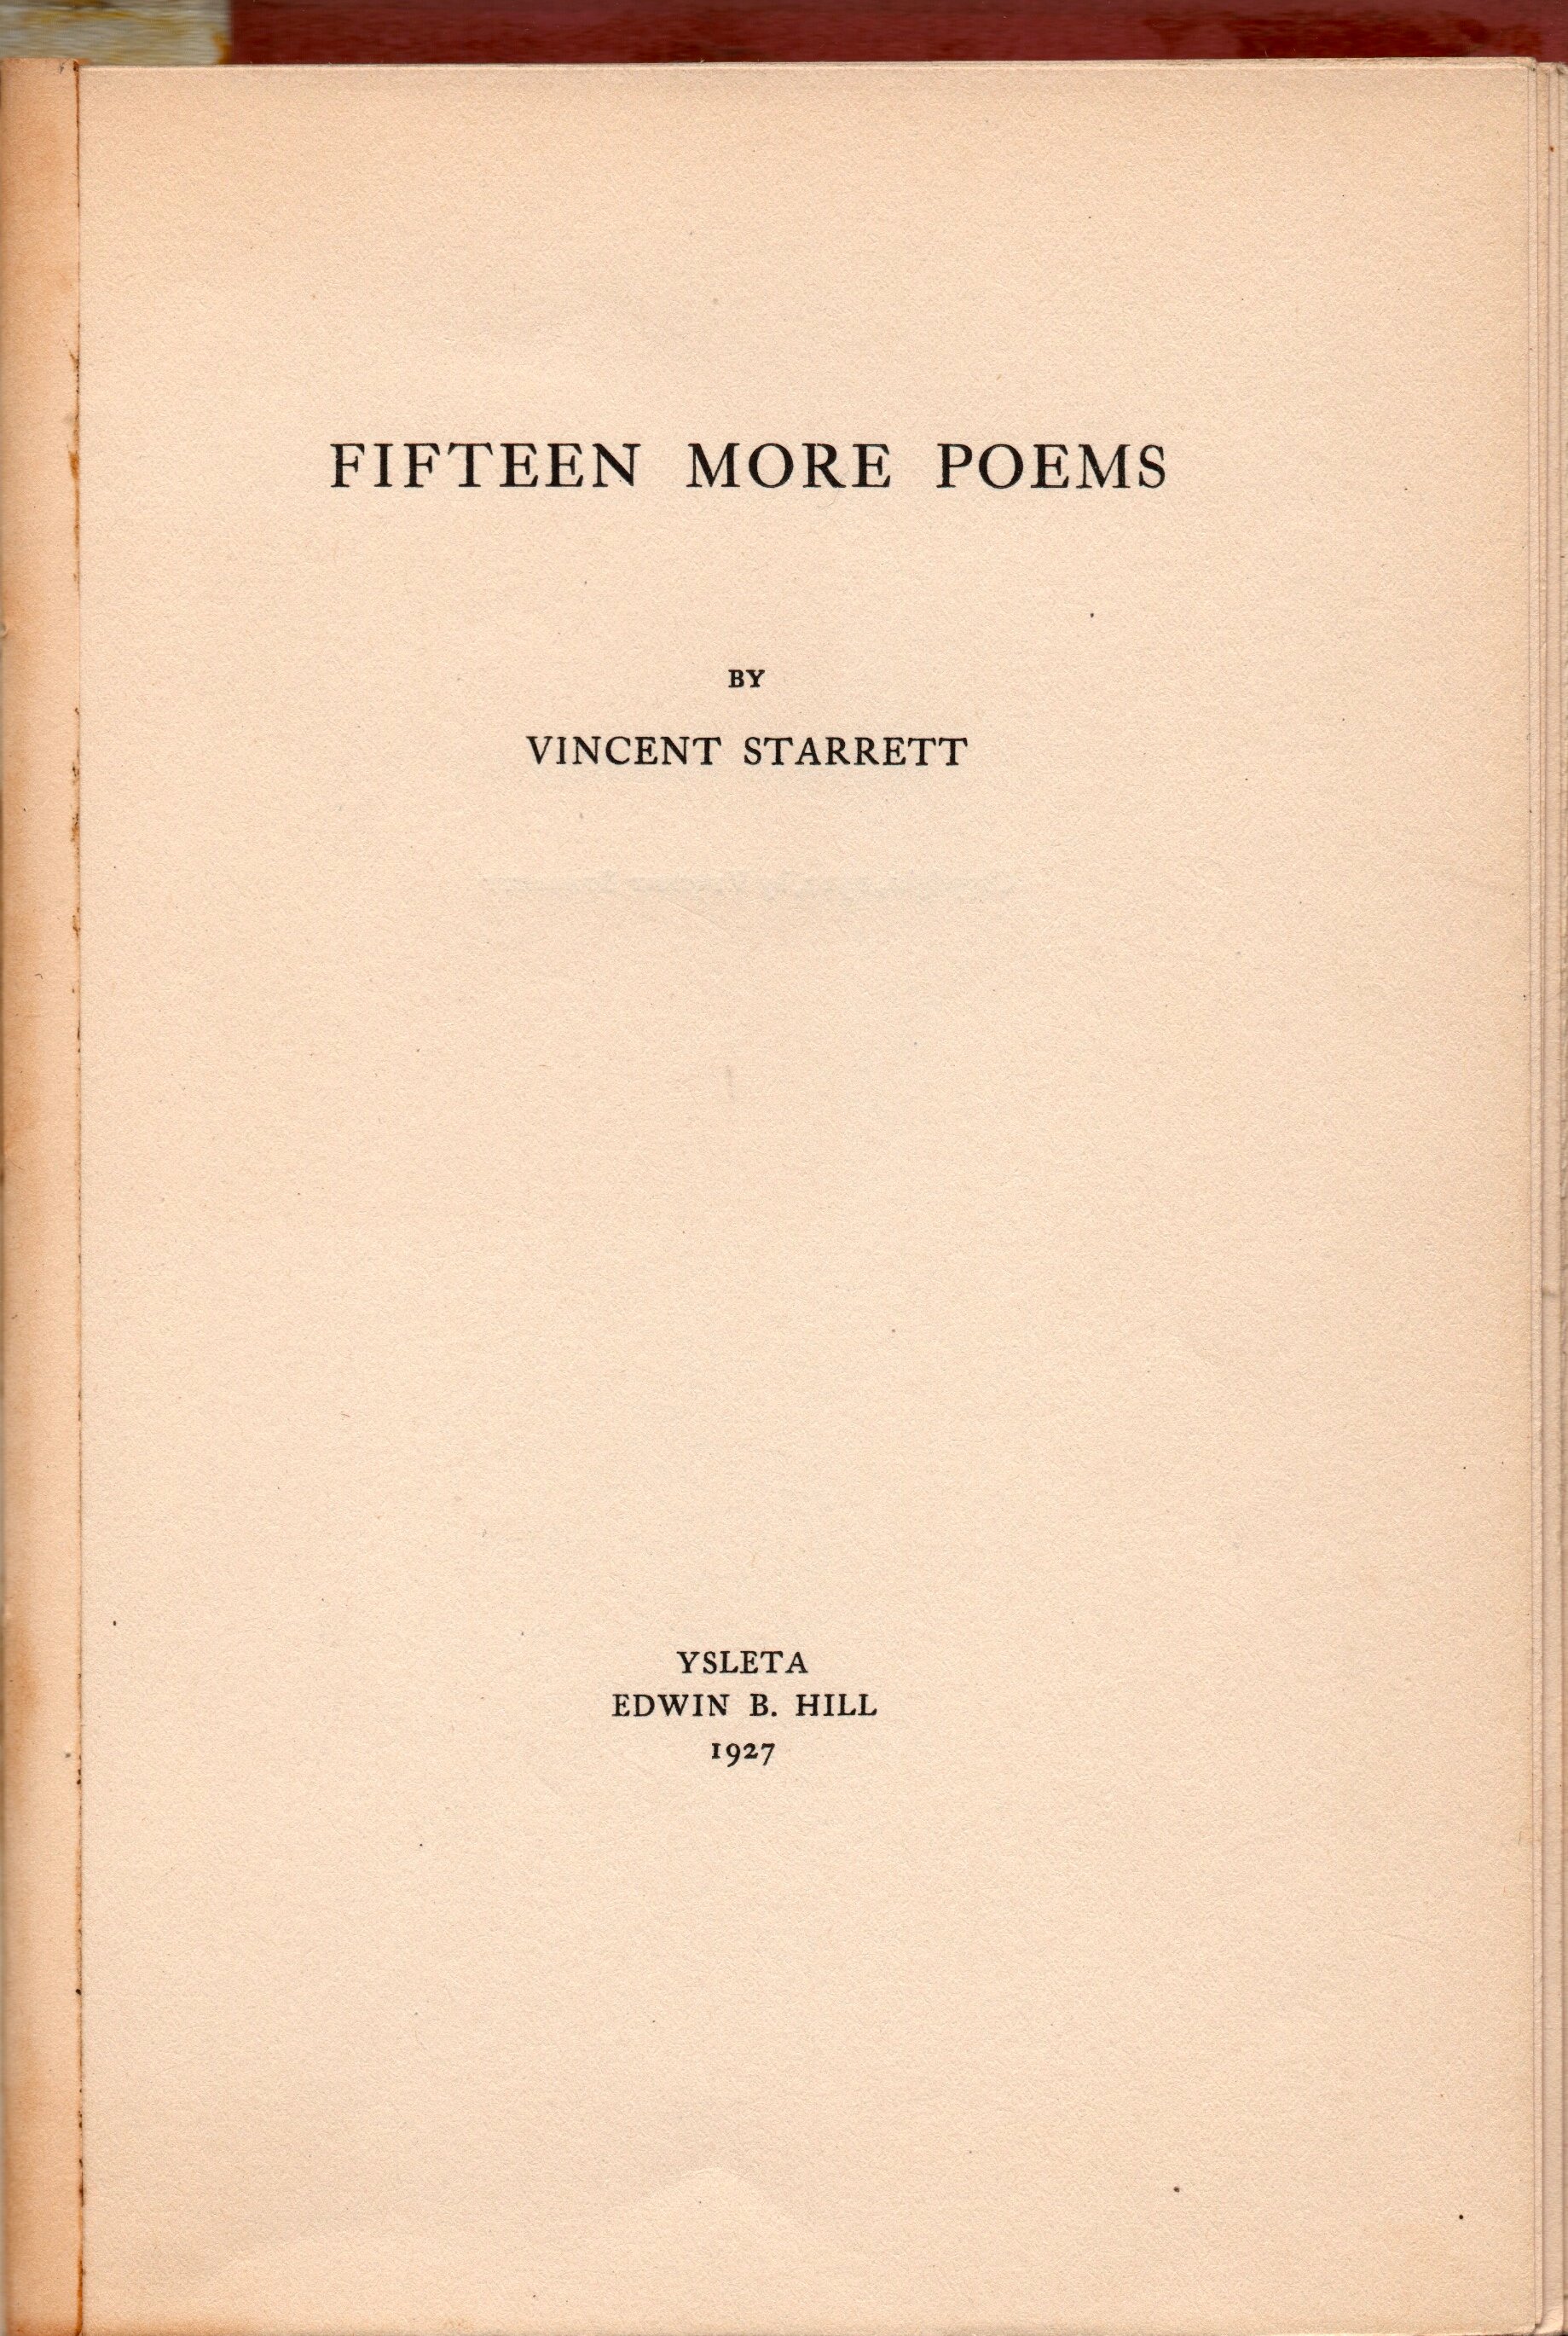  The title  Fifteen More Poems  can be a bit misleading. This is actually the first volume of Starrett’s poems published by Hill. 